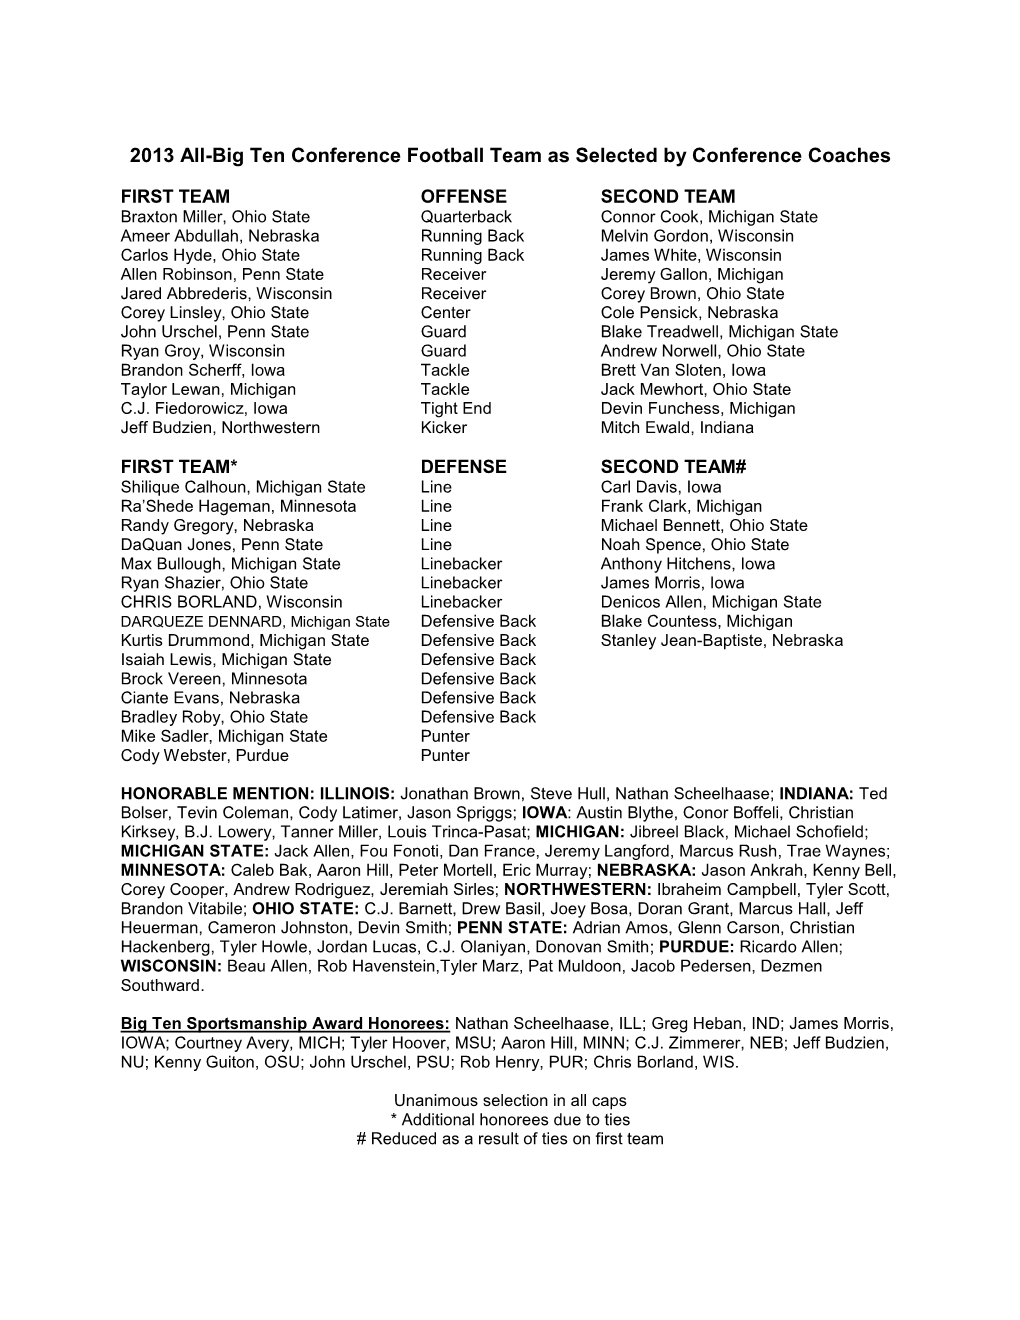 2013 All-Big Ten Conference Football Team As Selected by Conference Coaches